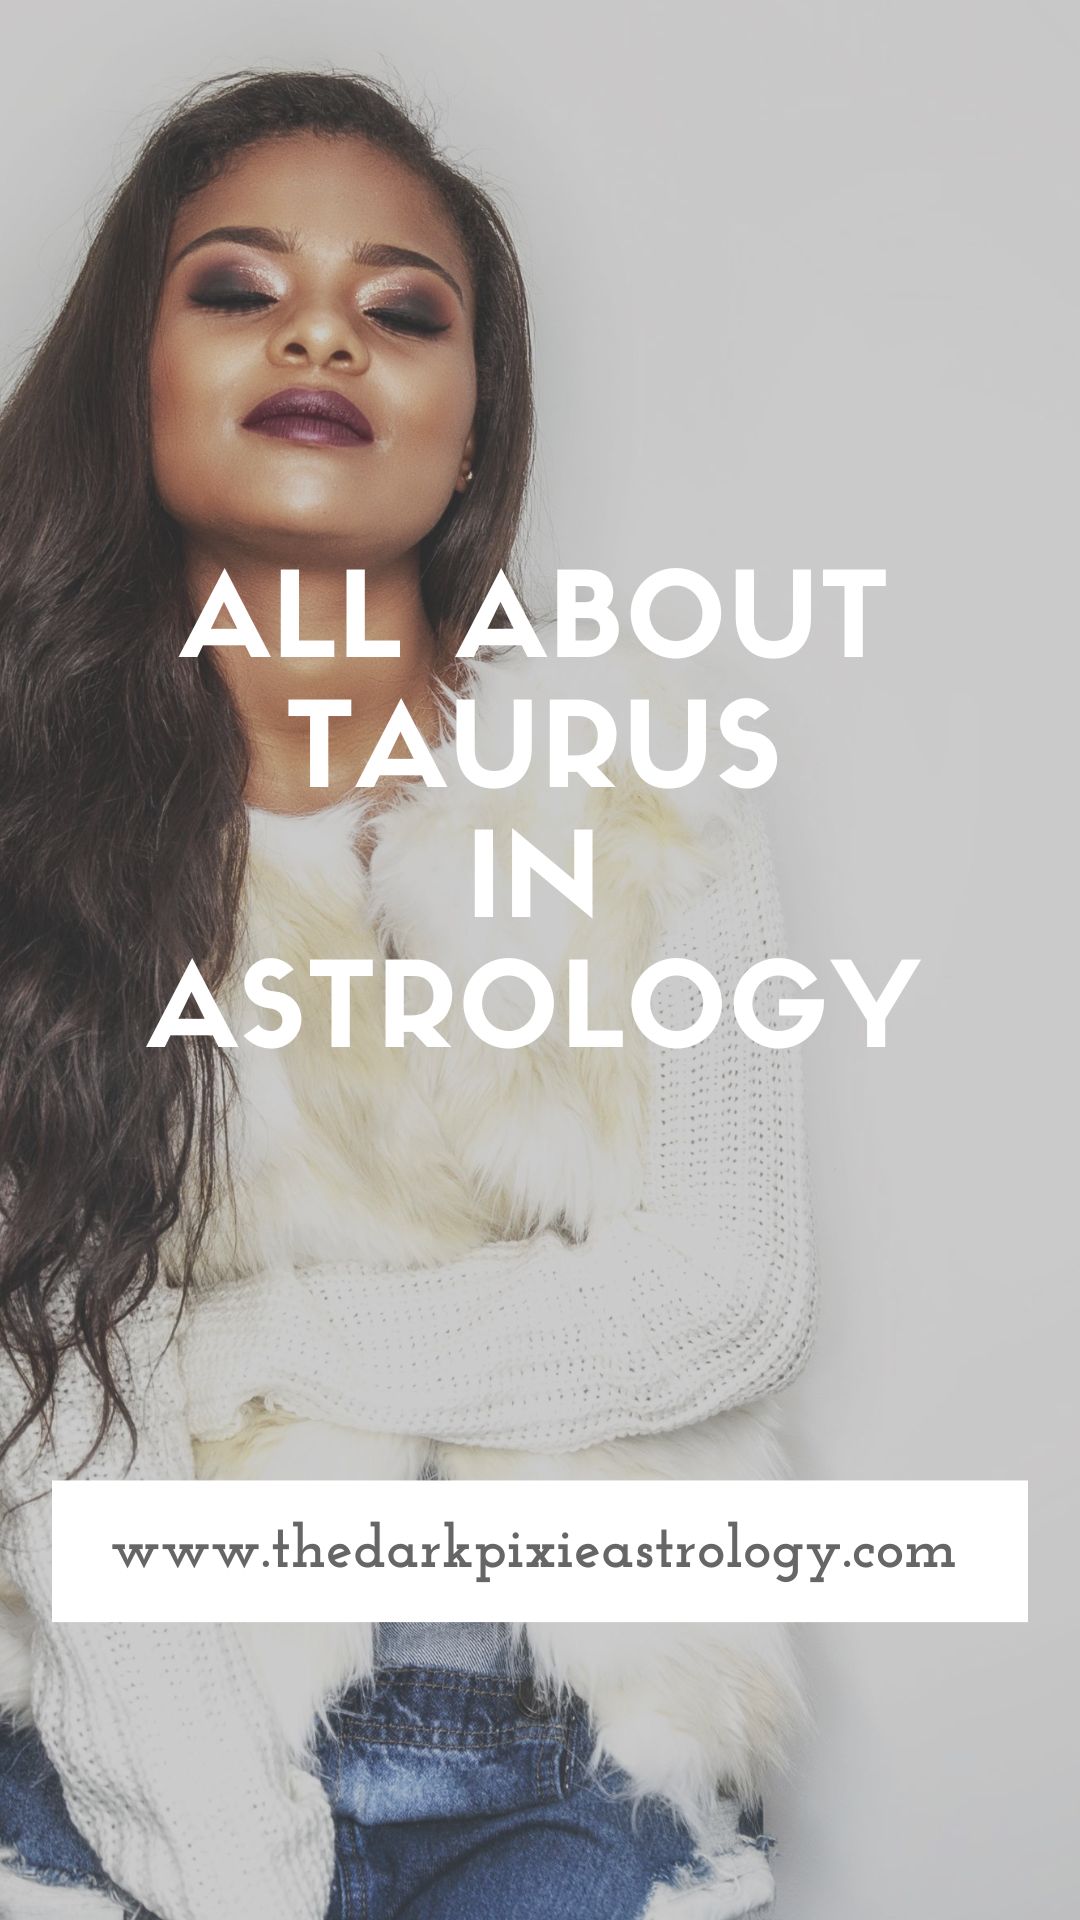 All About Taurus in Astrology - The Dark Pixie Astrology